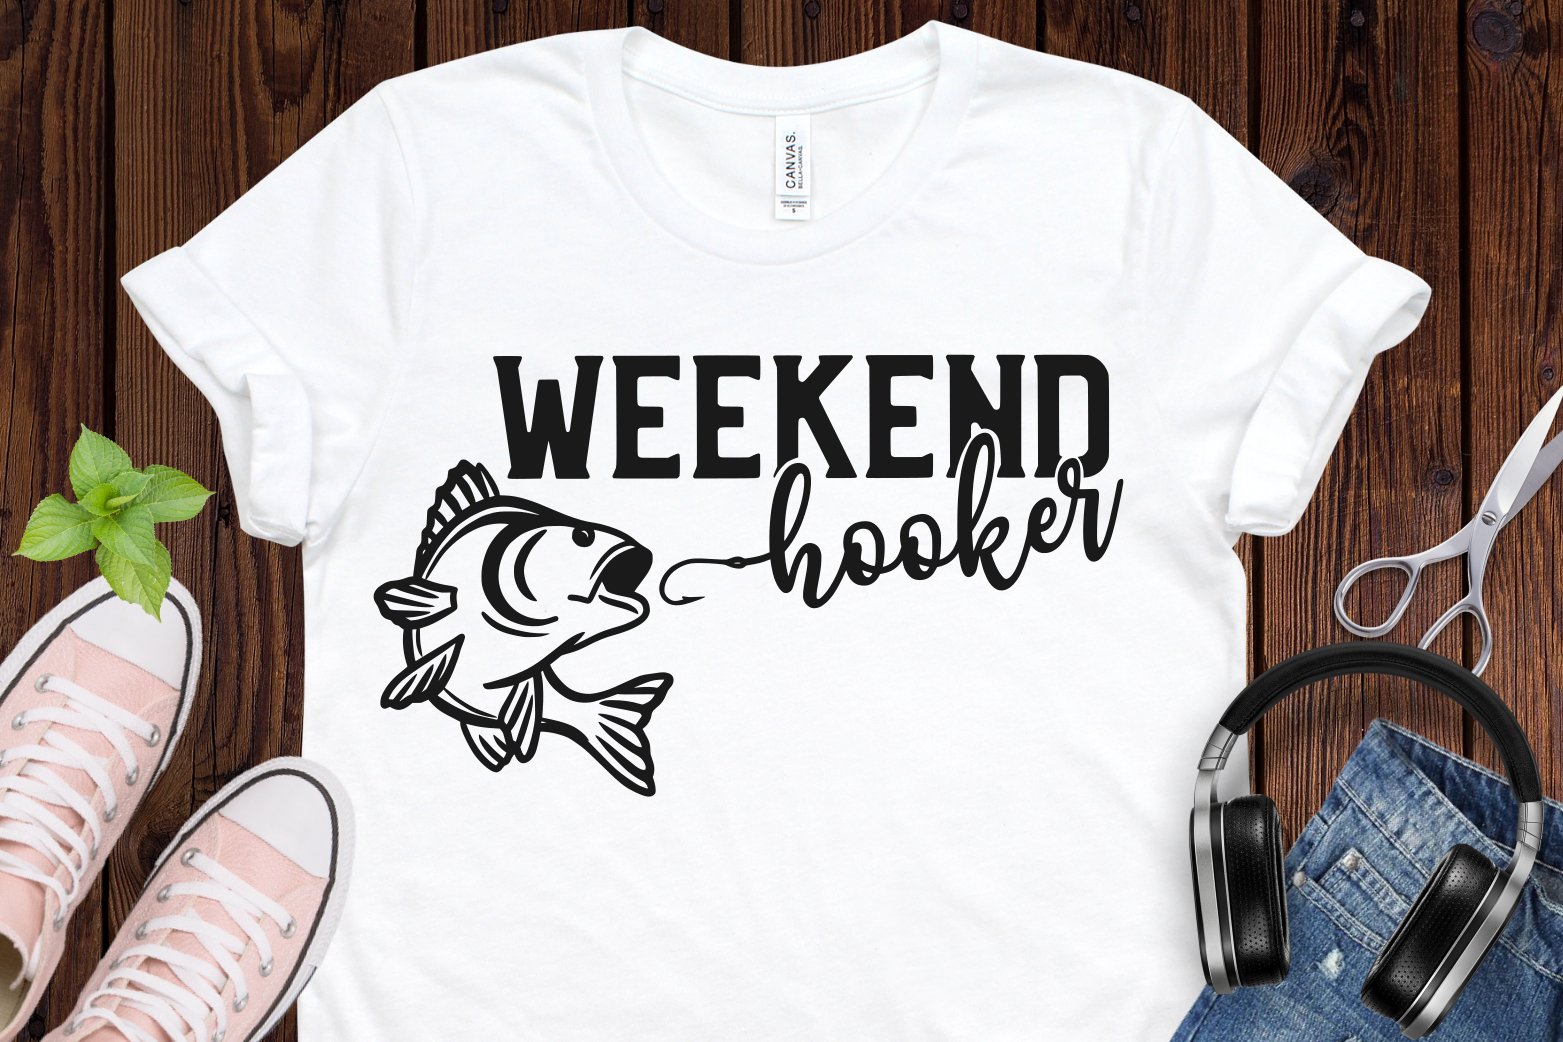 Spend your weekend with a fishing vibes.